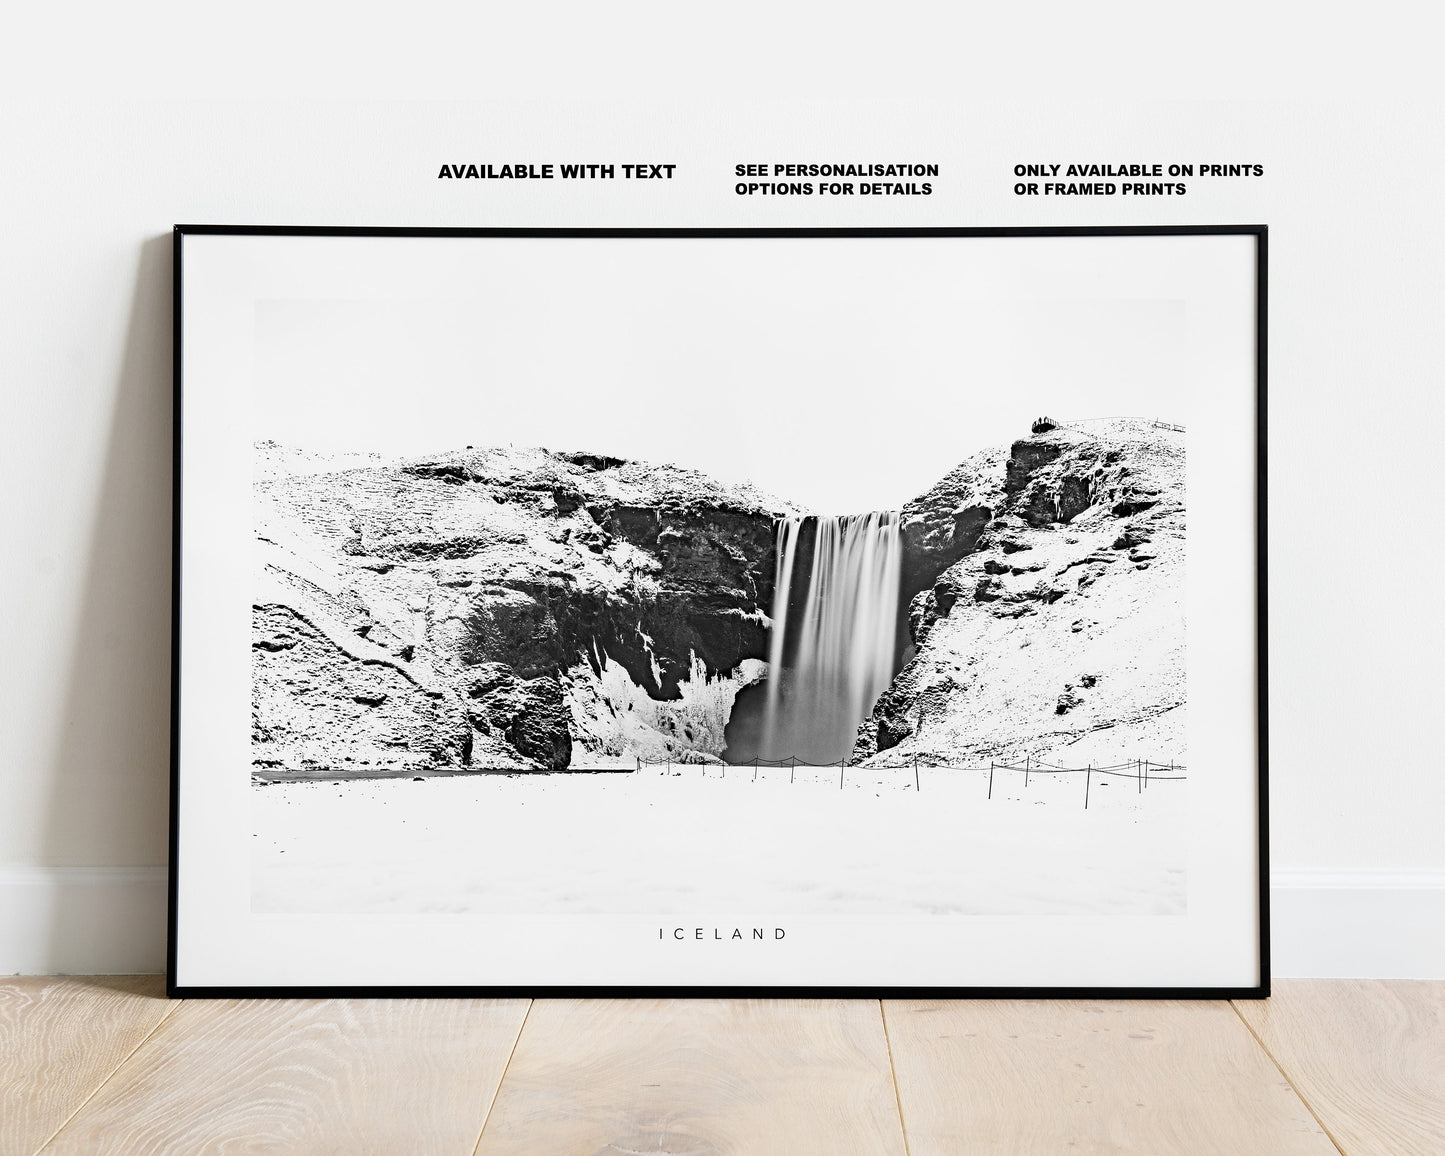 Skogafoss Waterfall - Iceland Photography Print - Iceland Wall Art - Iceland Poster - Black and White Photography - Landscape - Waterfalls